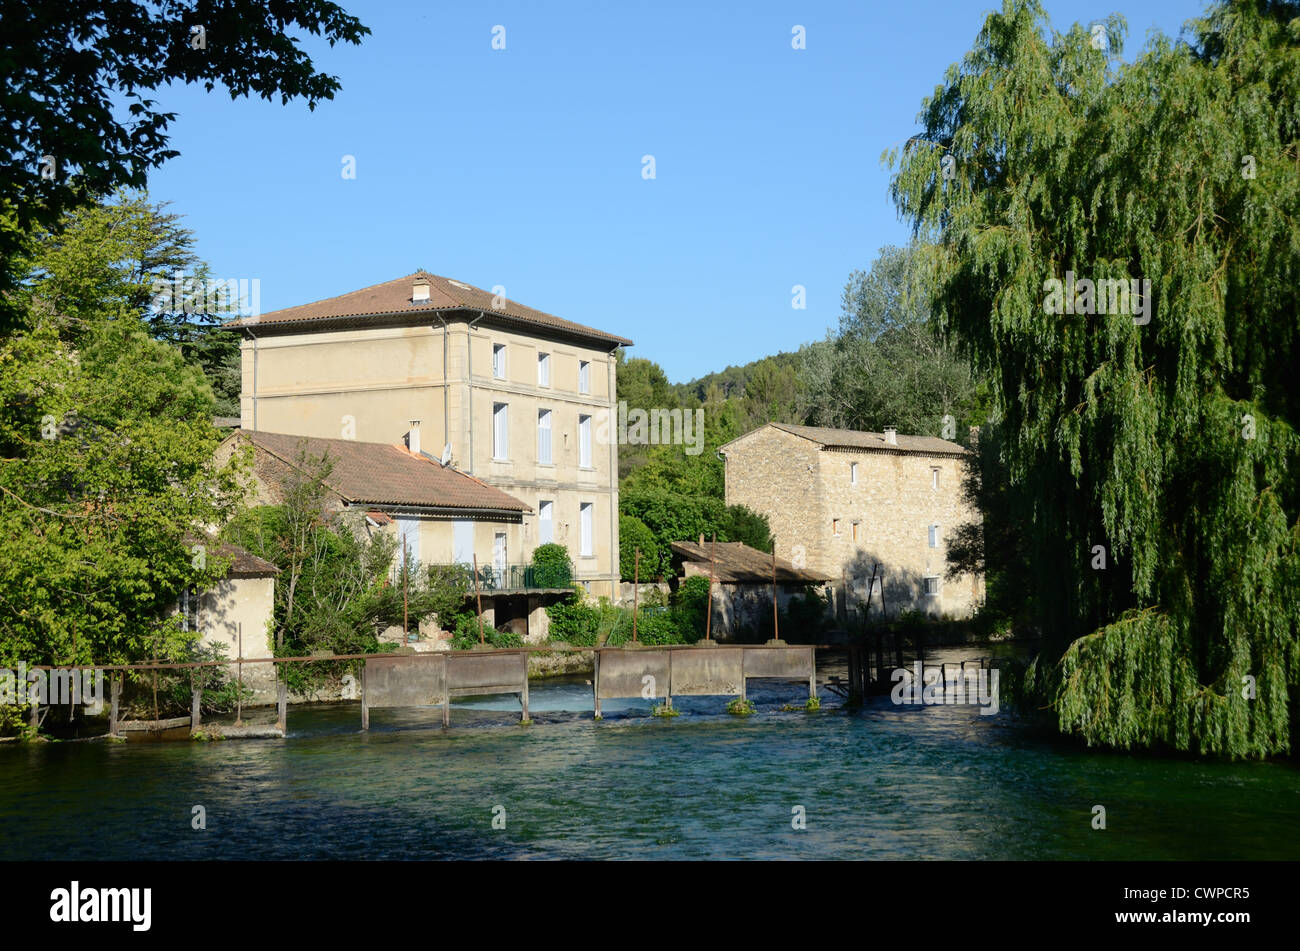 Water Mill and Weir on River Sorgue and Weeping Willow, Salix babylonica, at Fontaine-de-Vaucluse Vaucluse Provence France Stock Photo